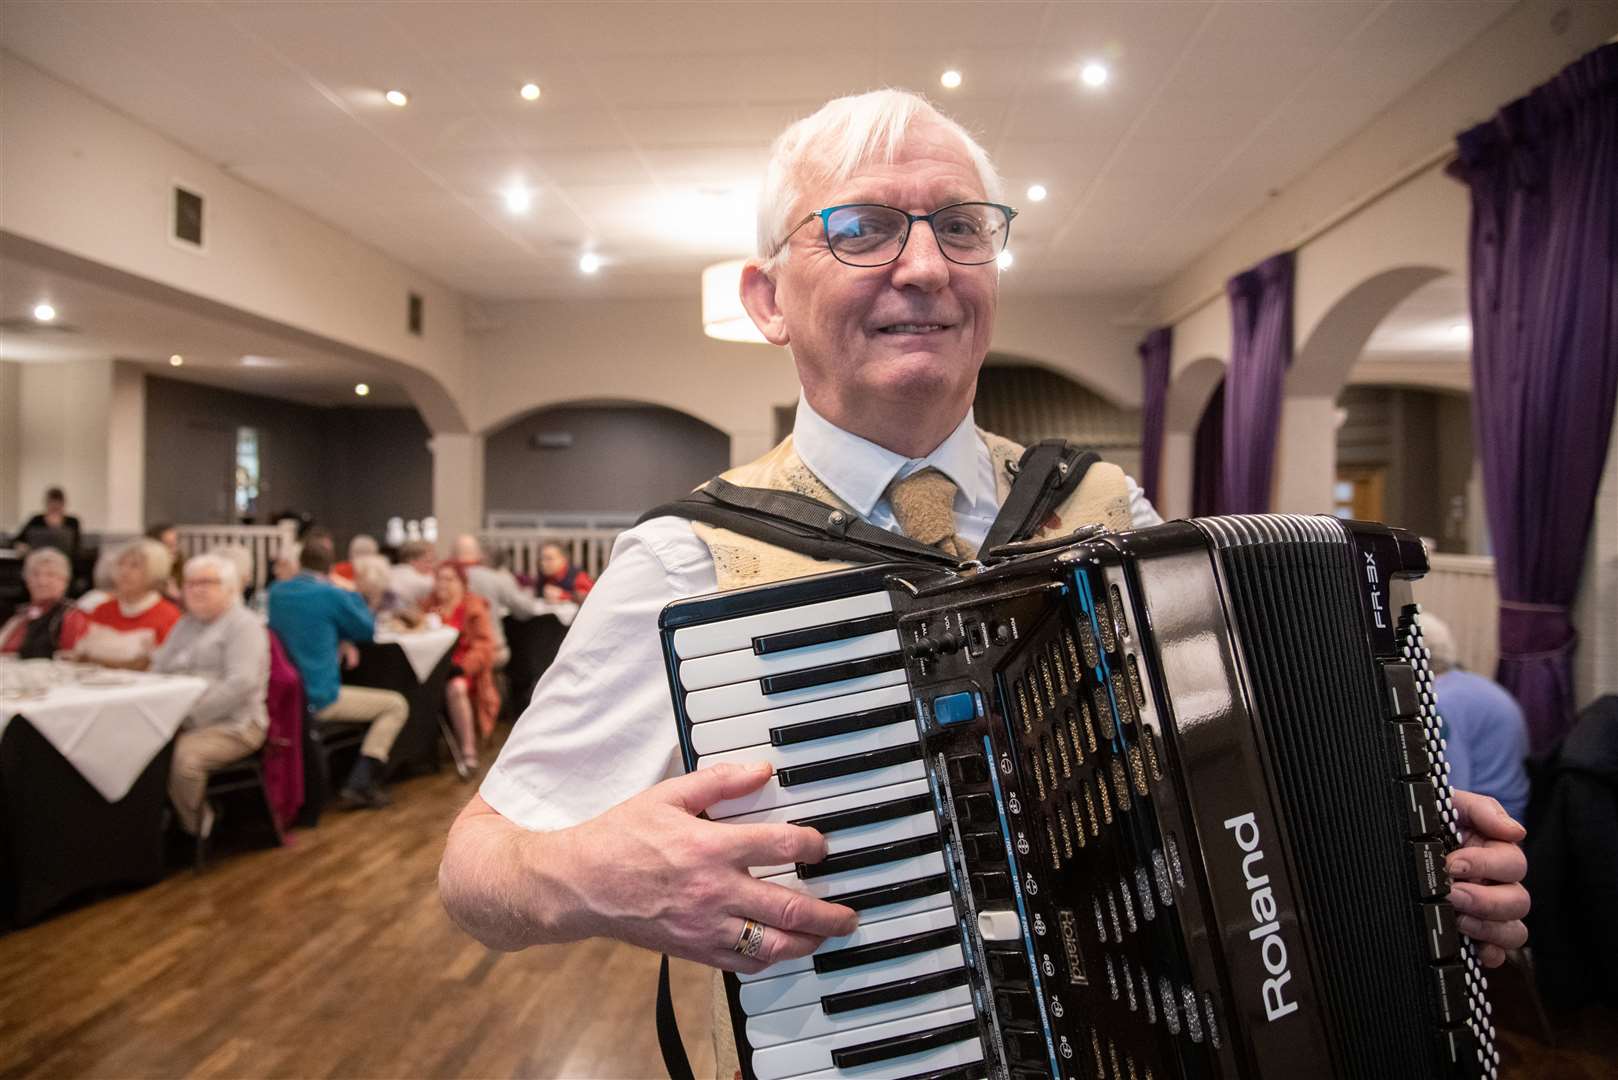 Ken Walker played the accordion at the event. Picture: Daniel Forsyth.